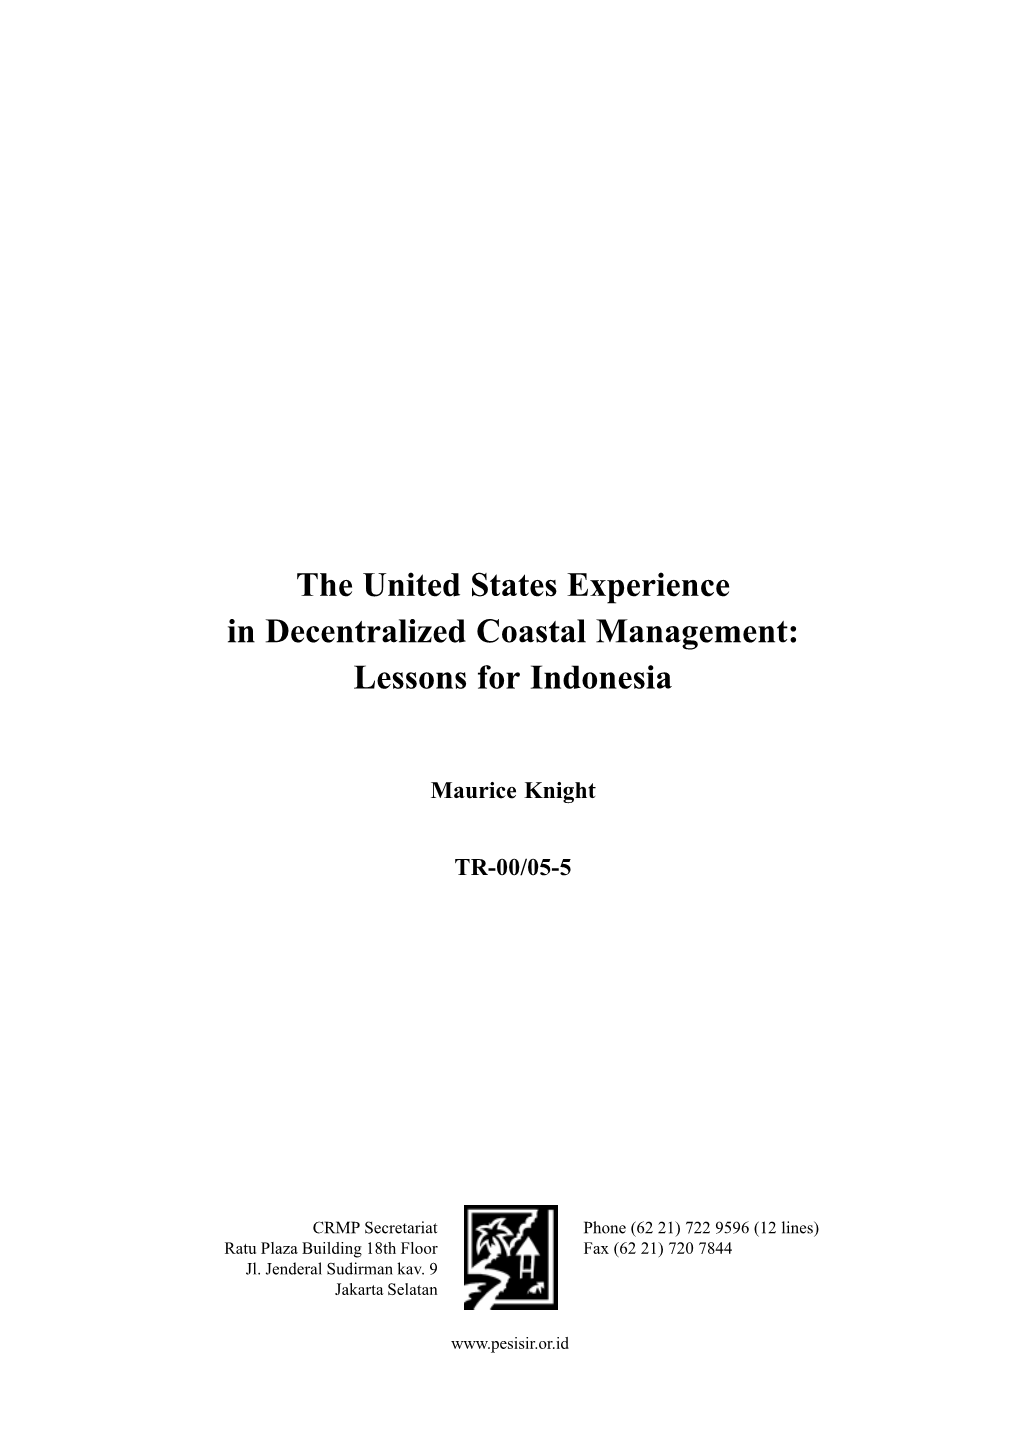 The United States Experience in Decentralized Coastal Management: Lessons for Indonesia